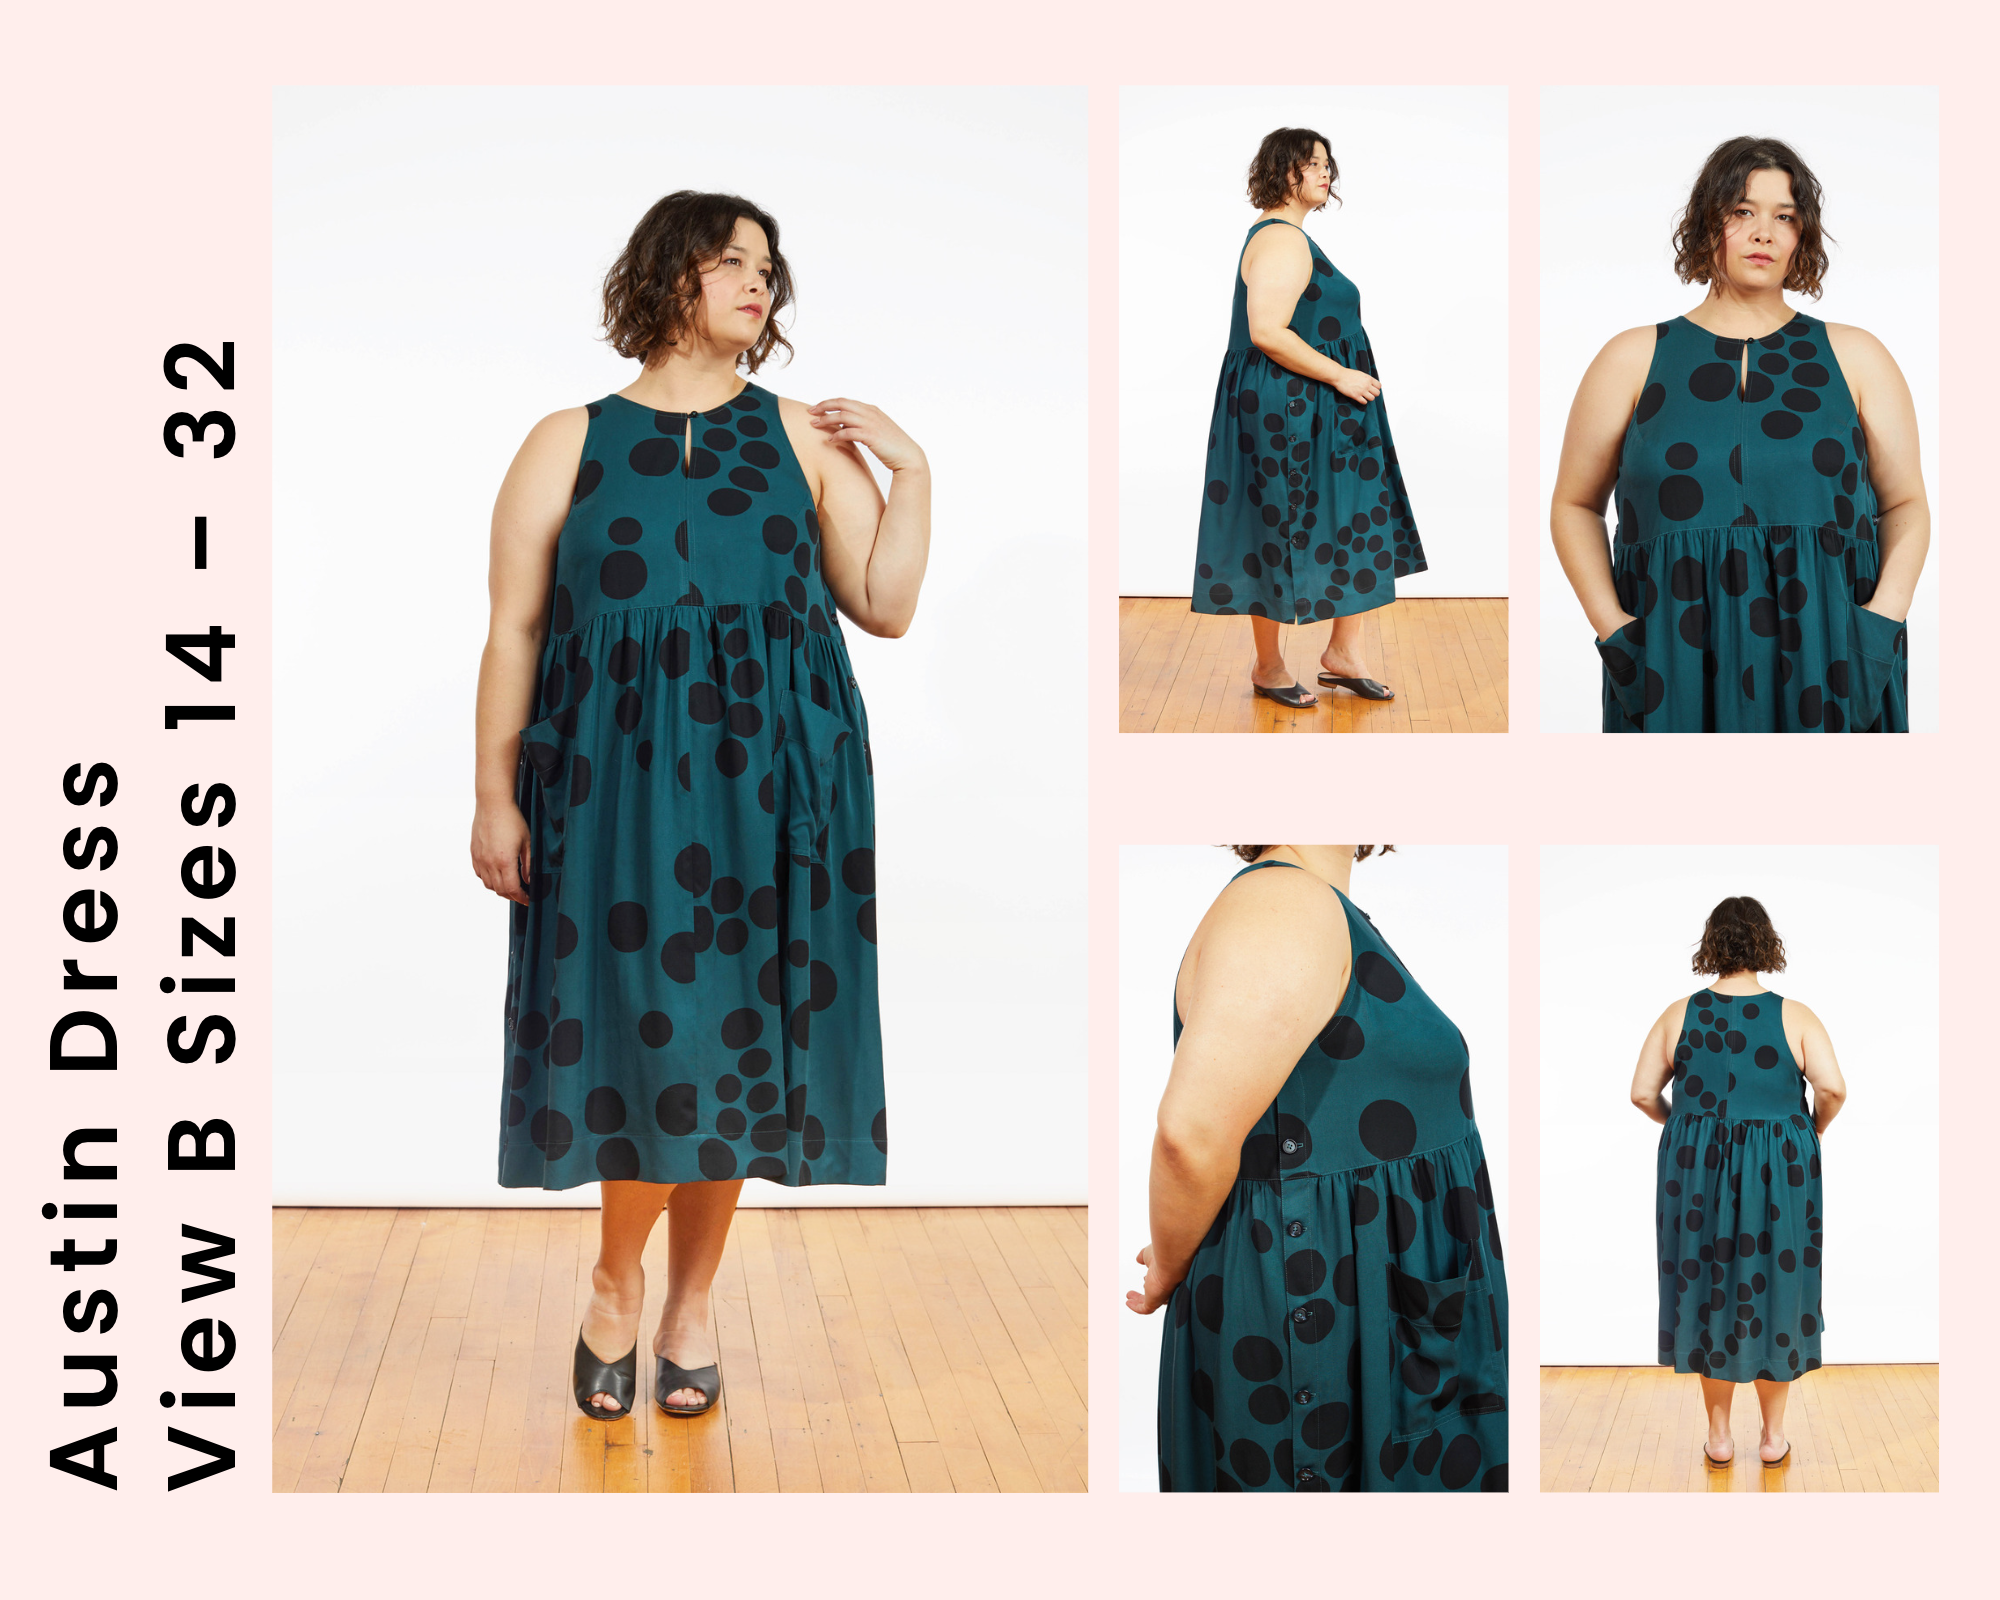 How to Shorten Straps on a Dress? - Sewing Team